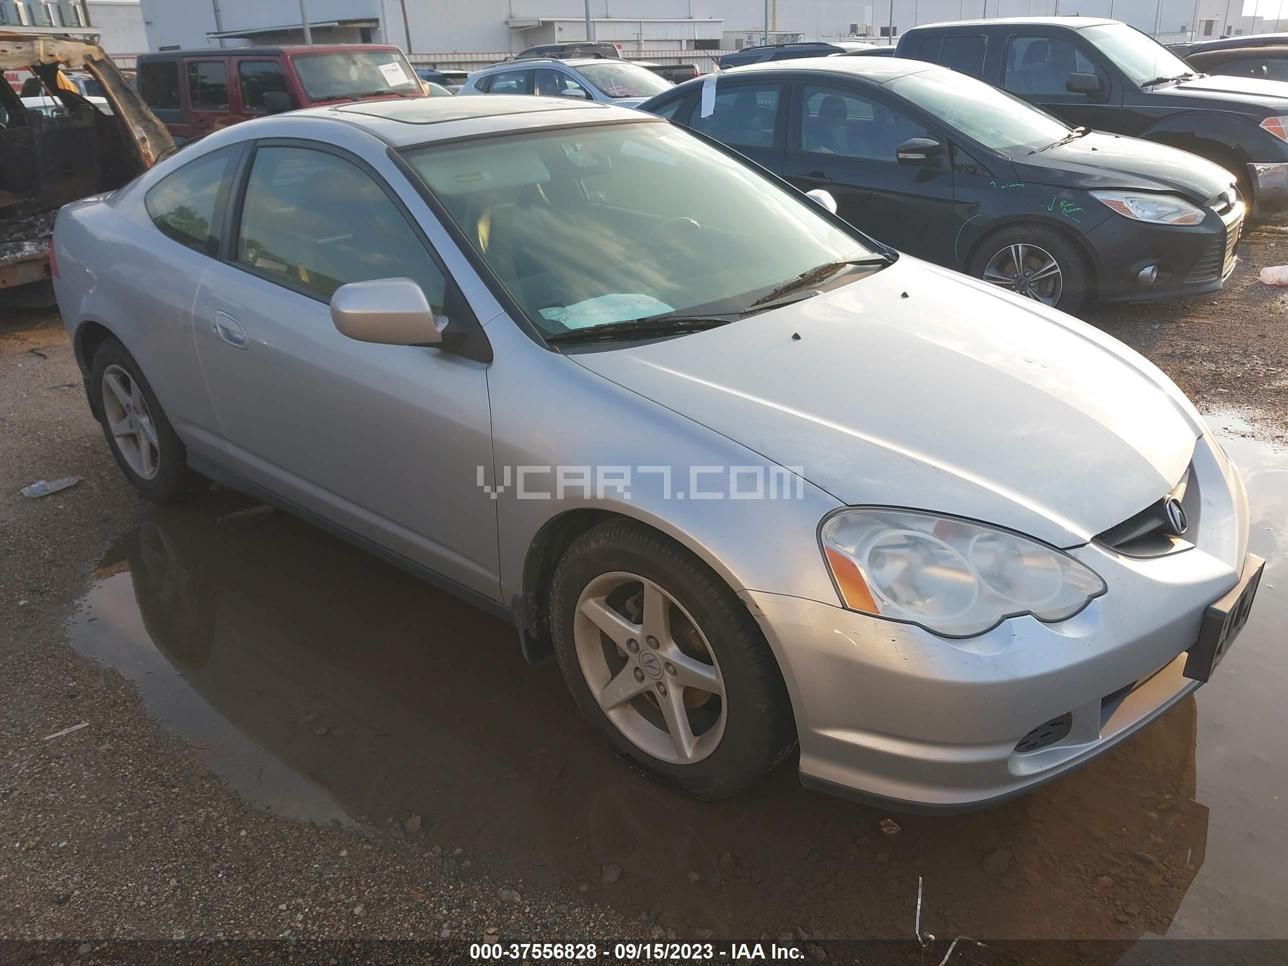 VIN: JH4DC54884S002304 - acura rsx